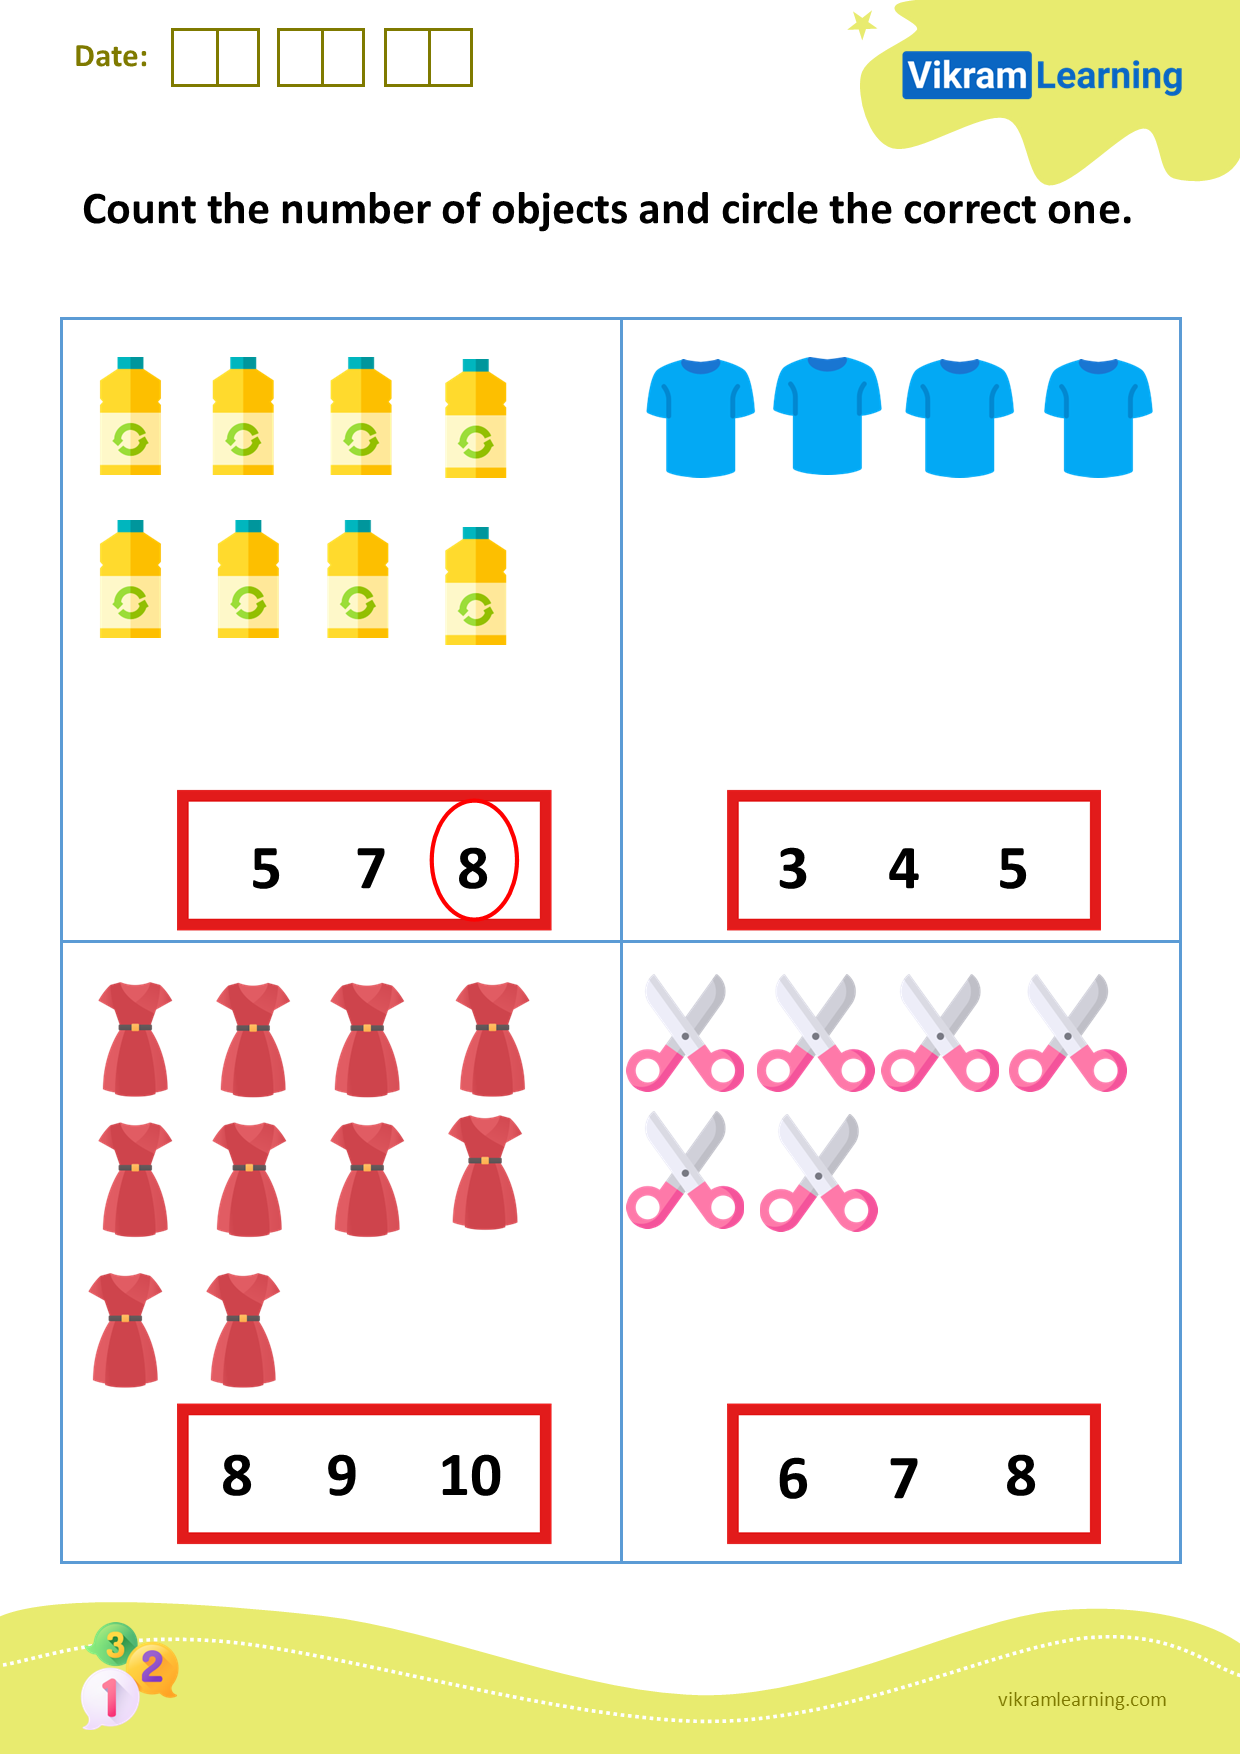 Download count the number of objects and circle the correct one worksheets